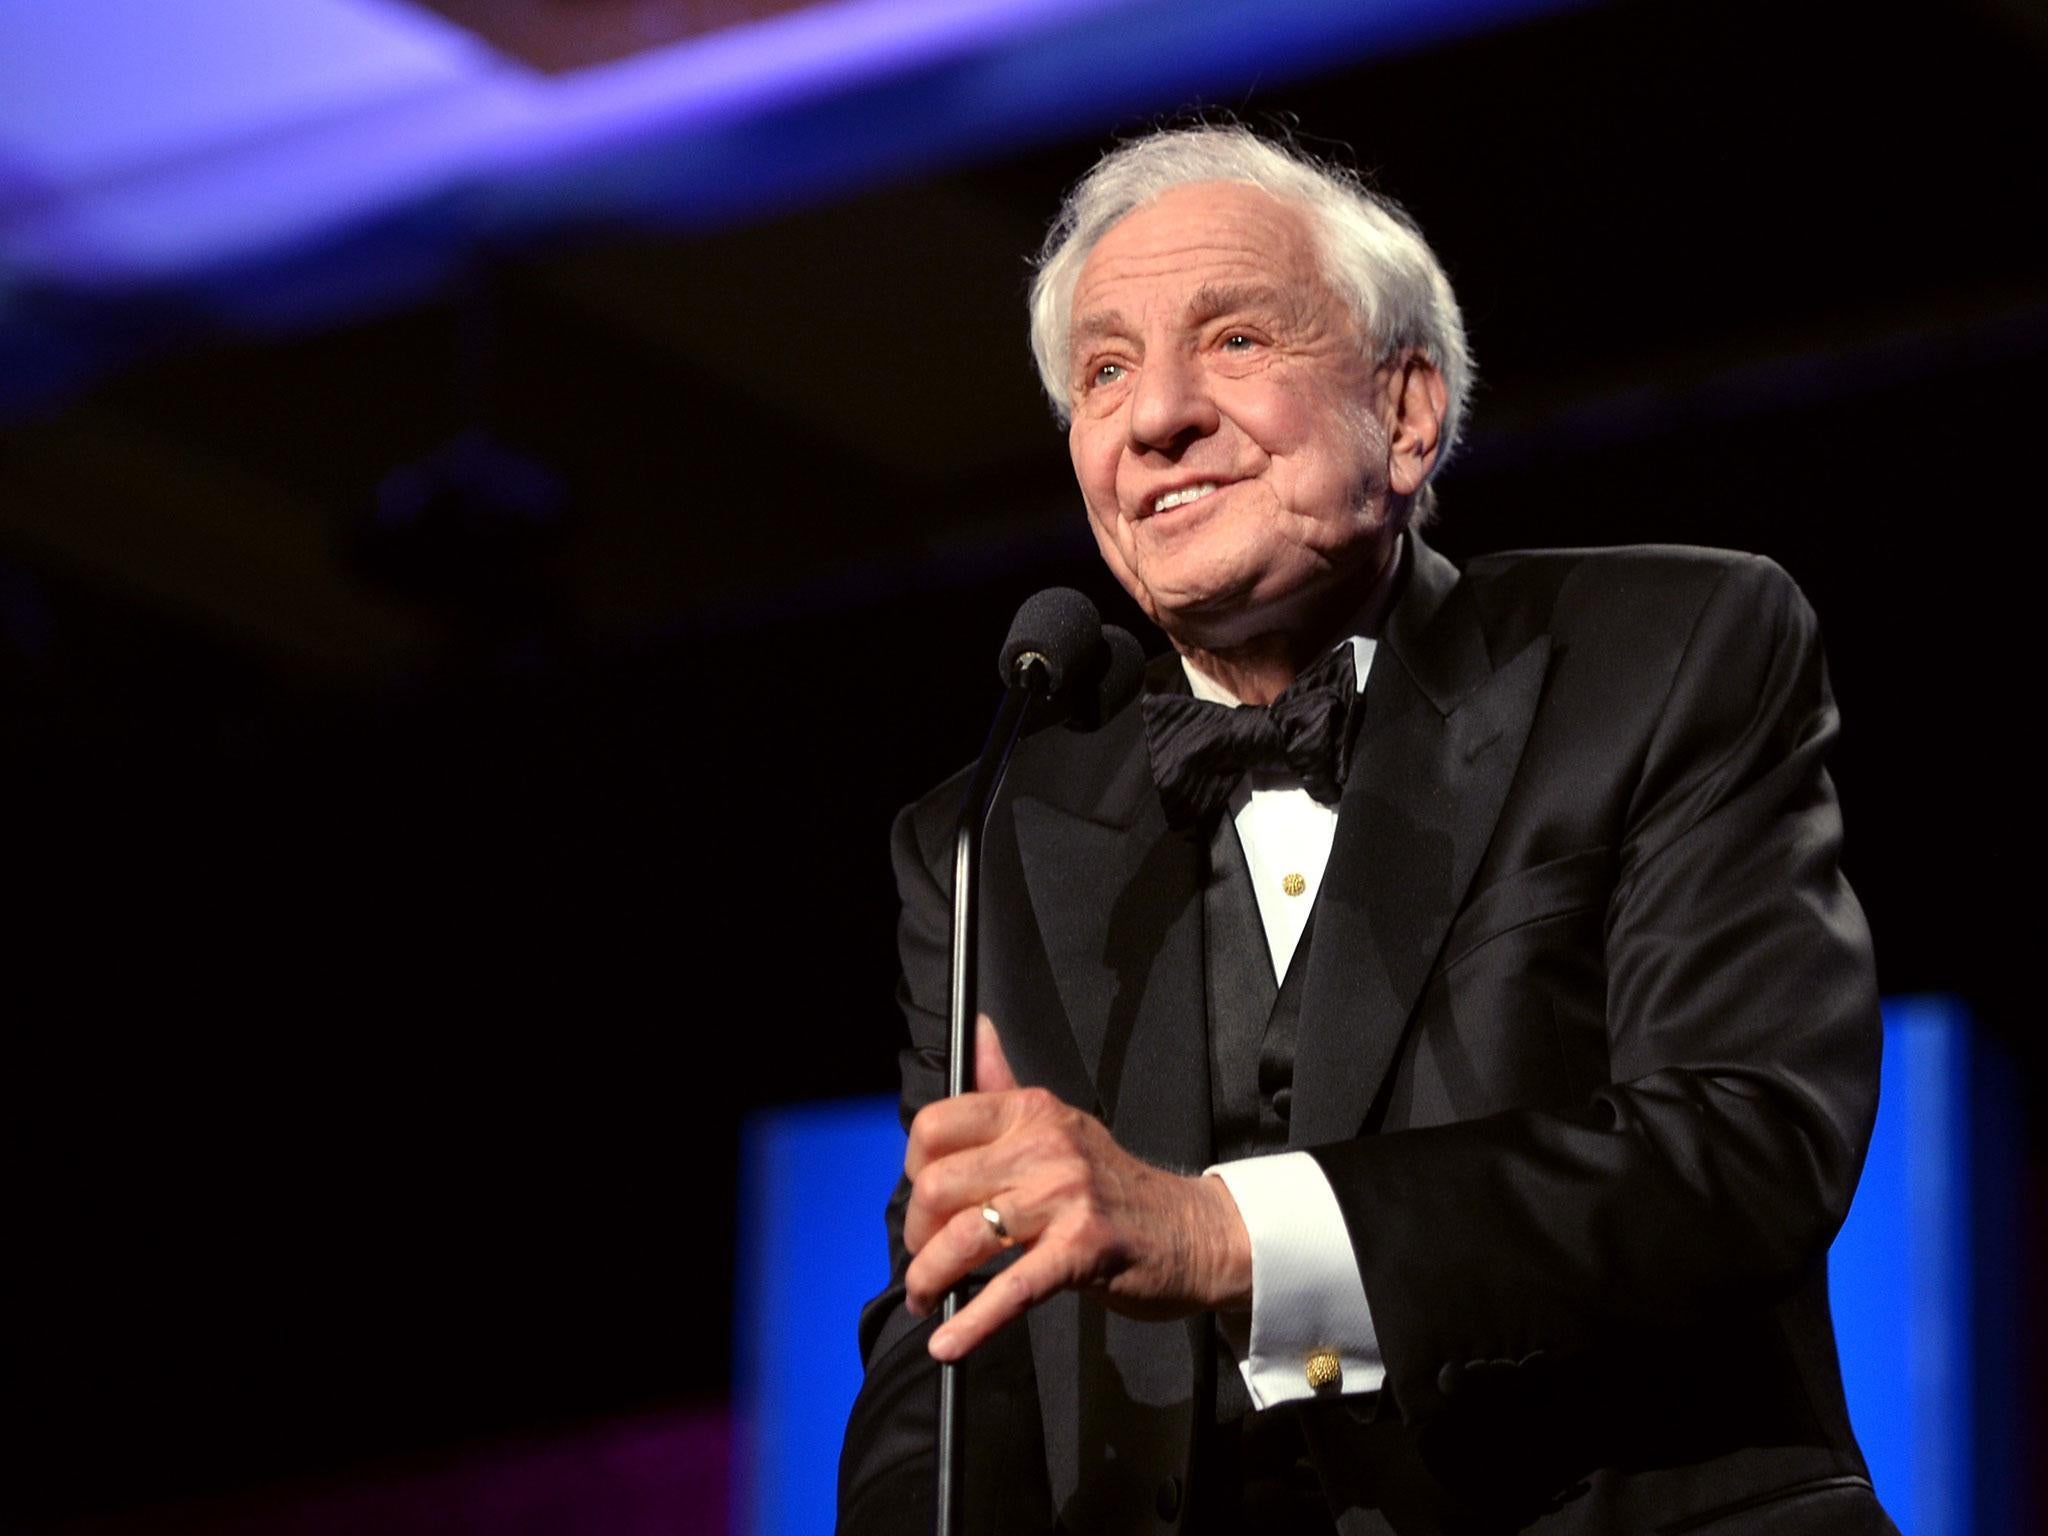 Director, writer and producer Garry Marshall, known for creating "Happy Days" and directing many hits including "Pretty Woman", passed away on July 19, 2016. He was 81 years old.